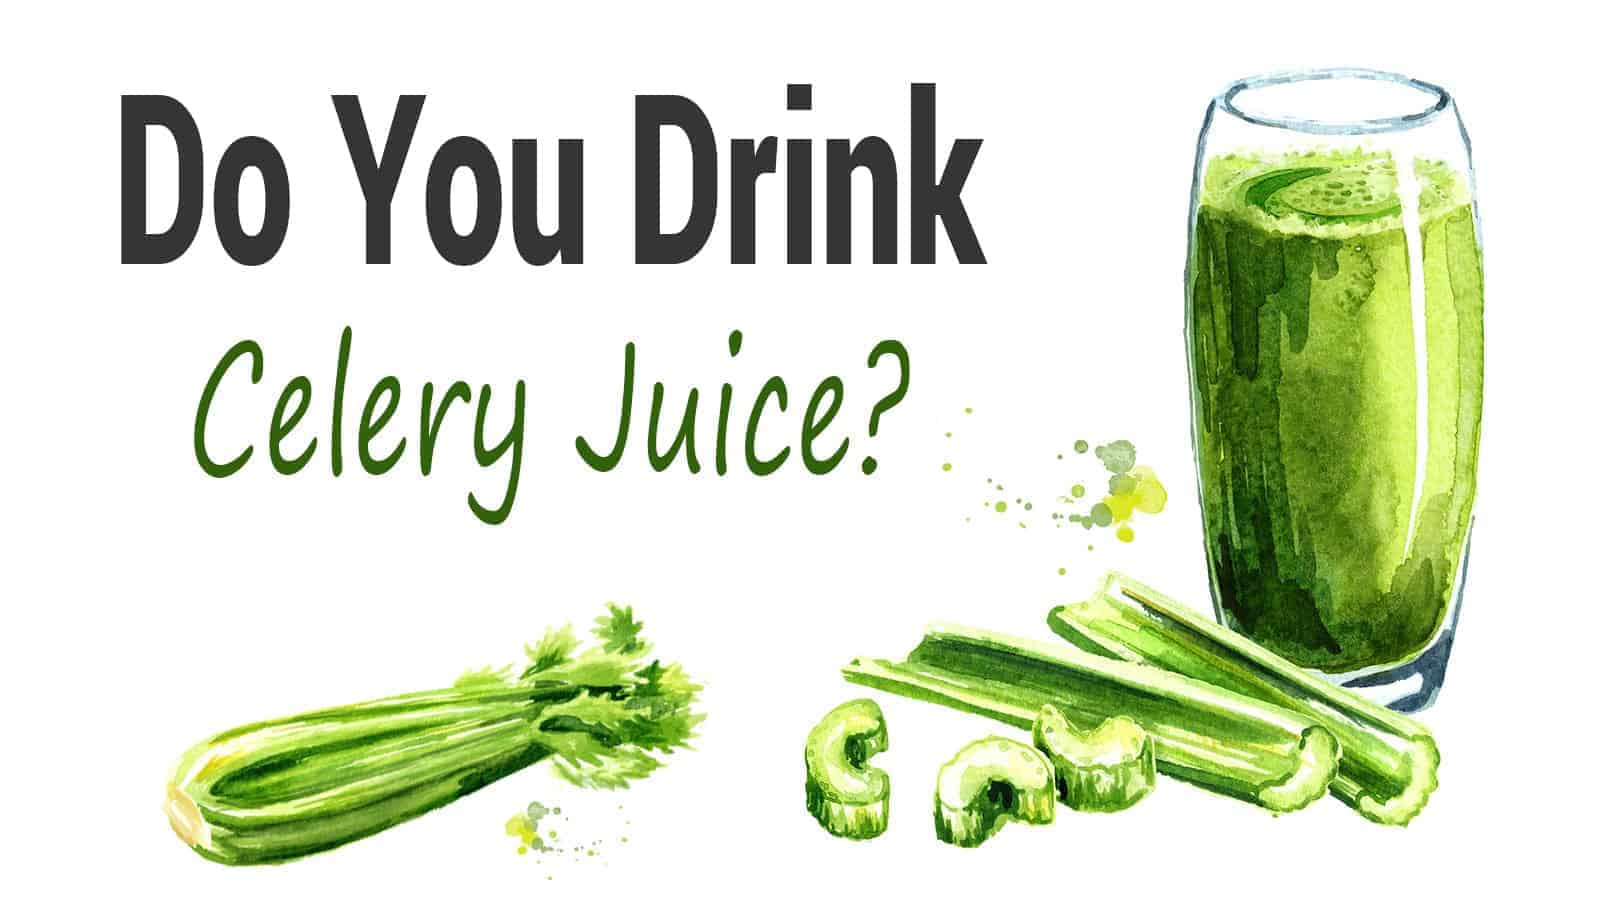 Science Explains 21 Things That Happen To Your Body When You Drink Celery Juice Every Day